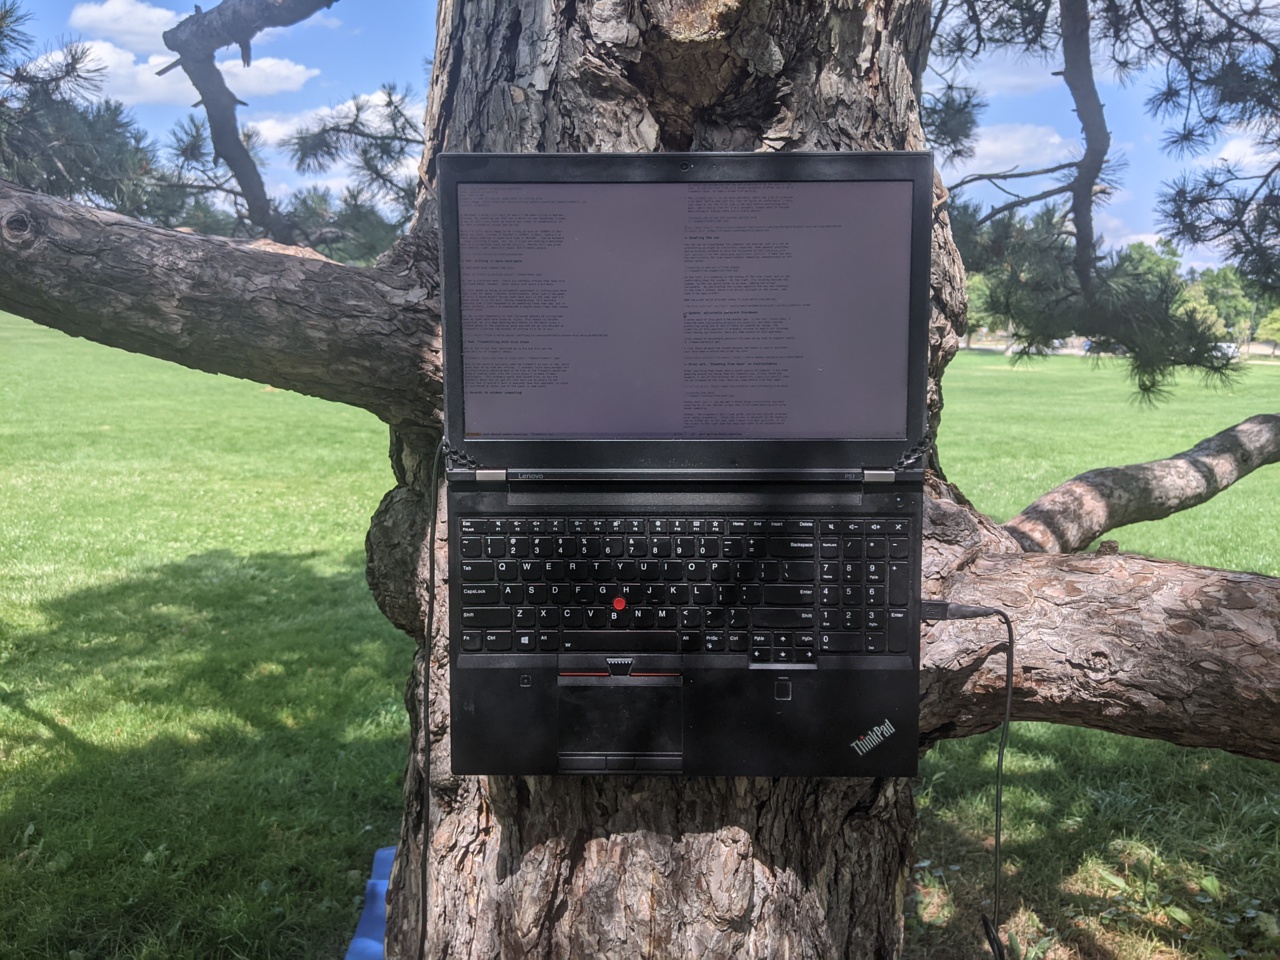 Computer strapped to a tree in a park in Boulder